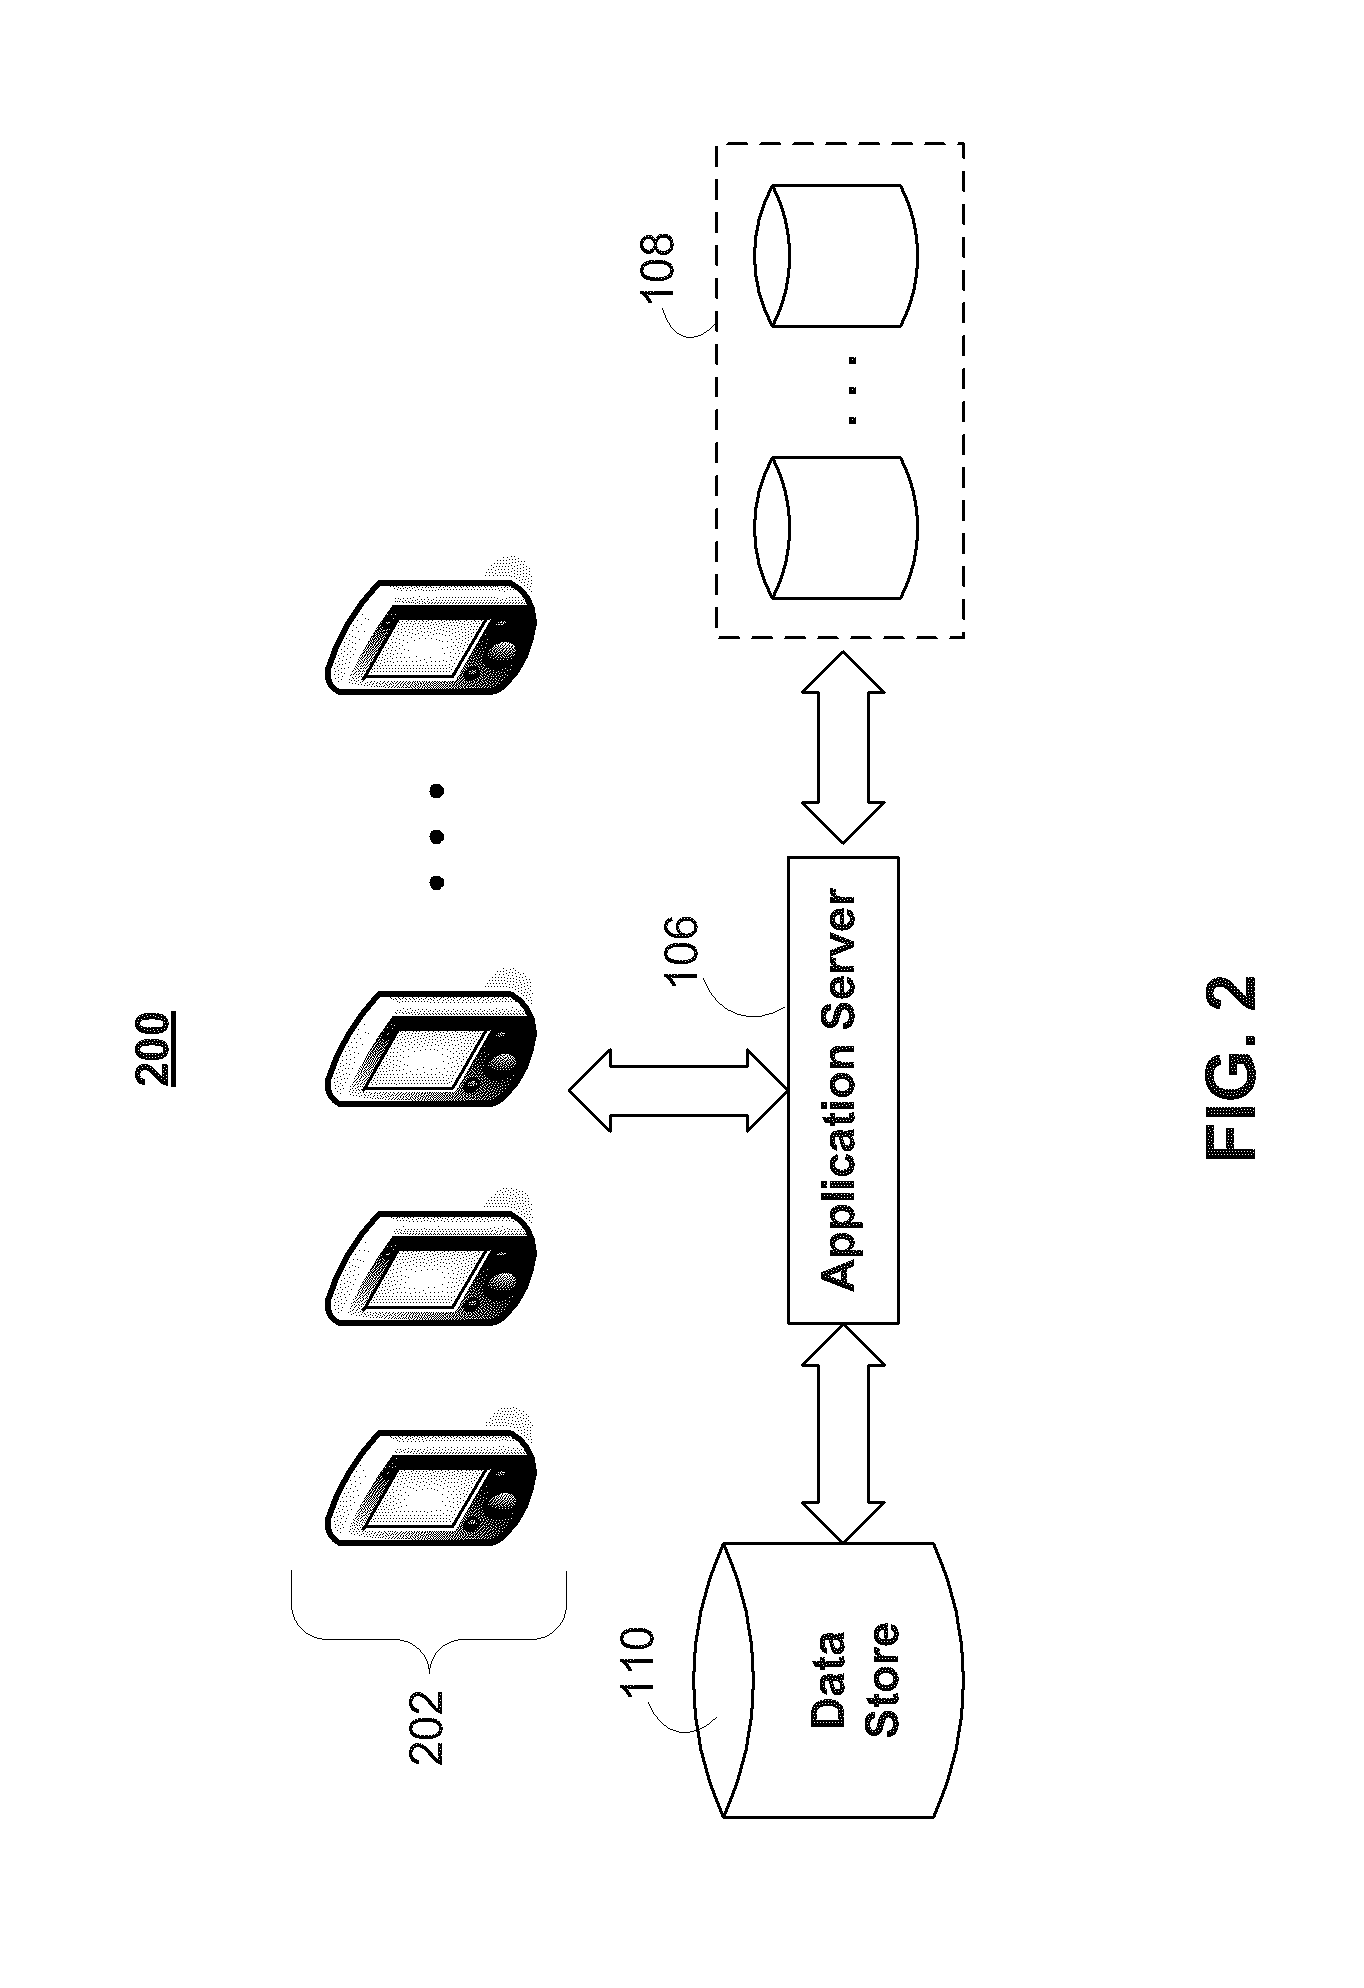 Systems and methods for conducting reliable assessments with connectivity information